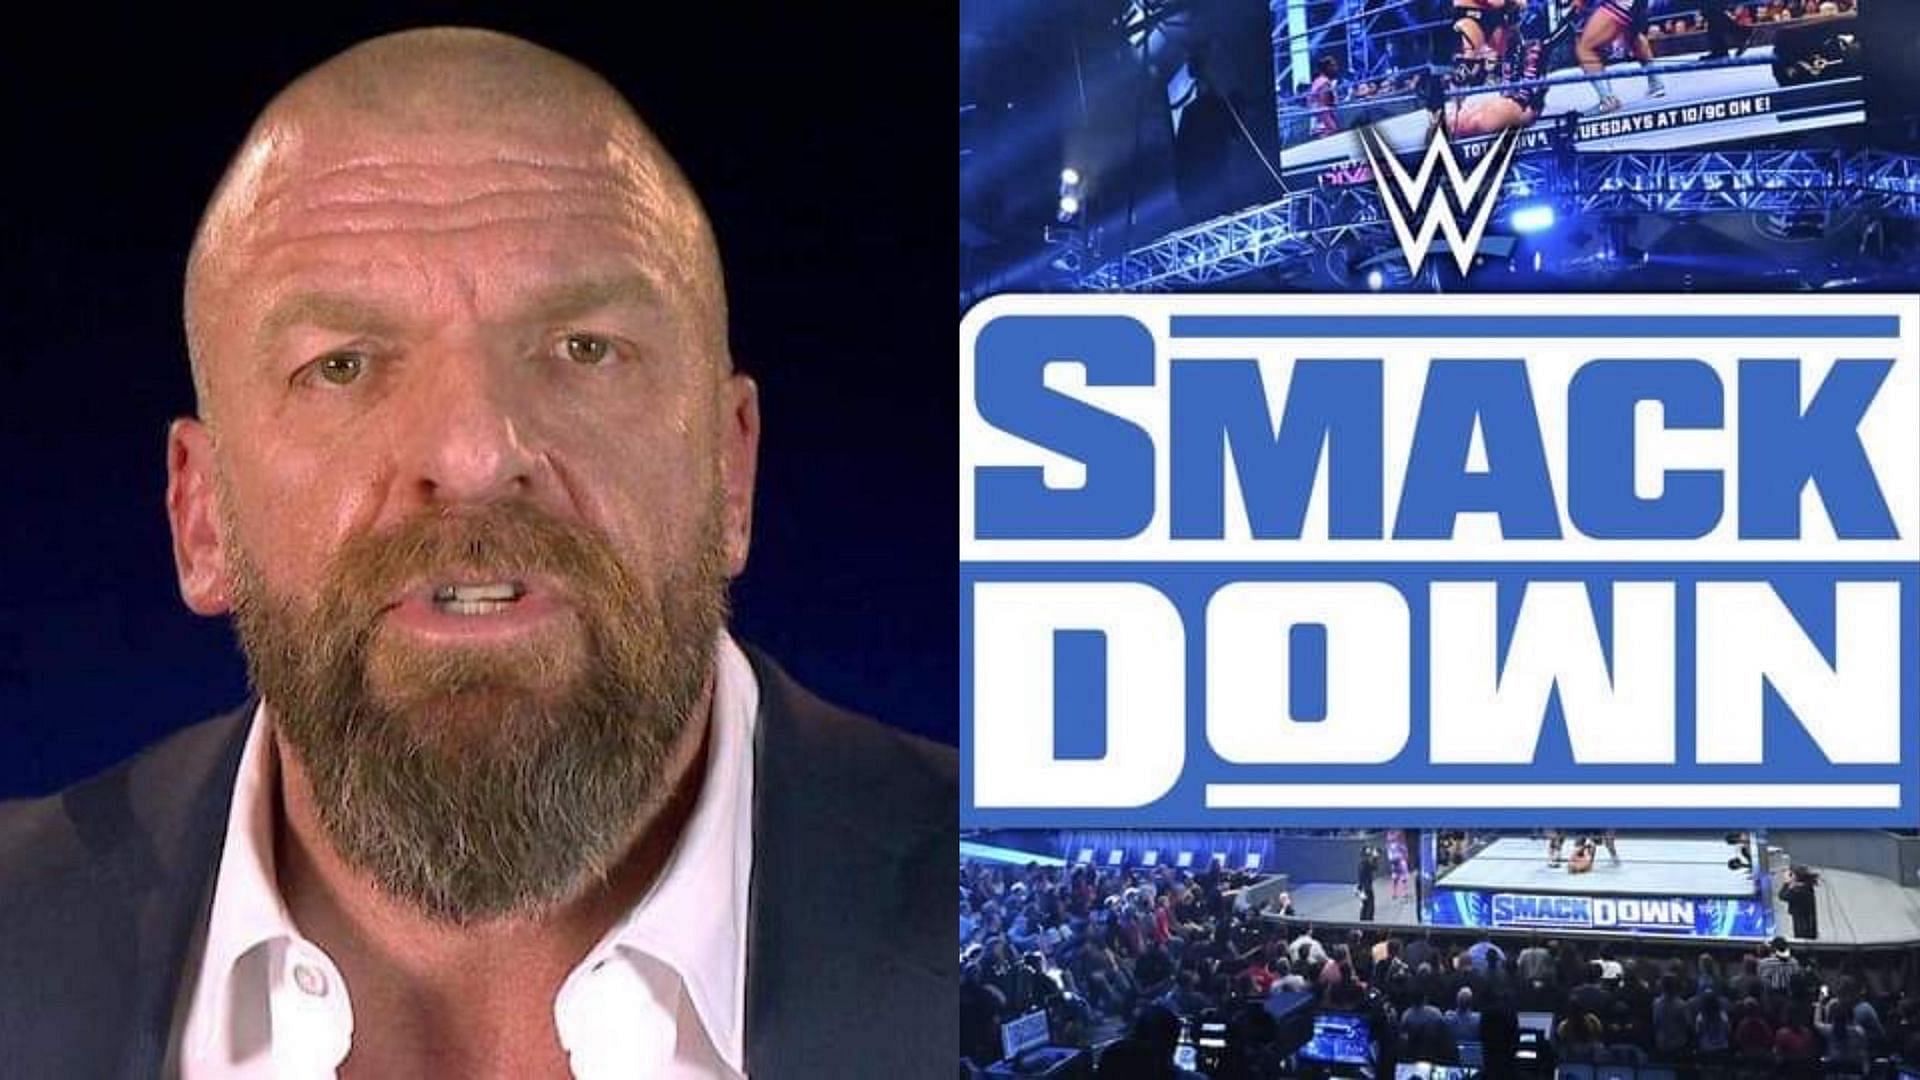 Triple H has booked an IC title match for SmackDown